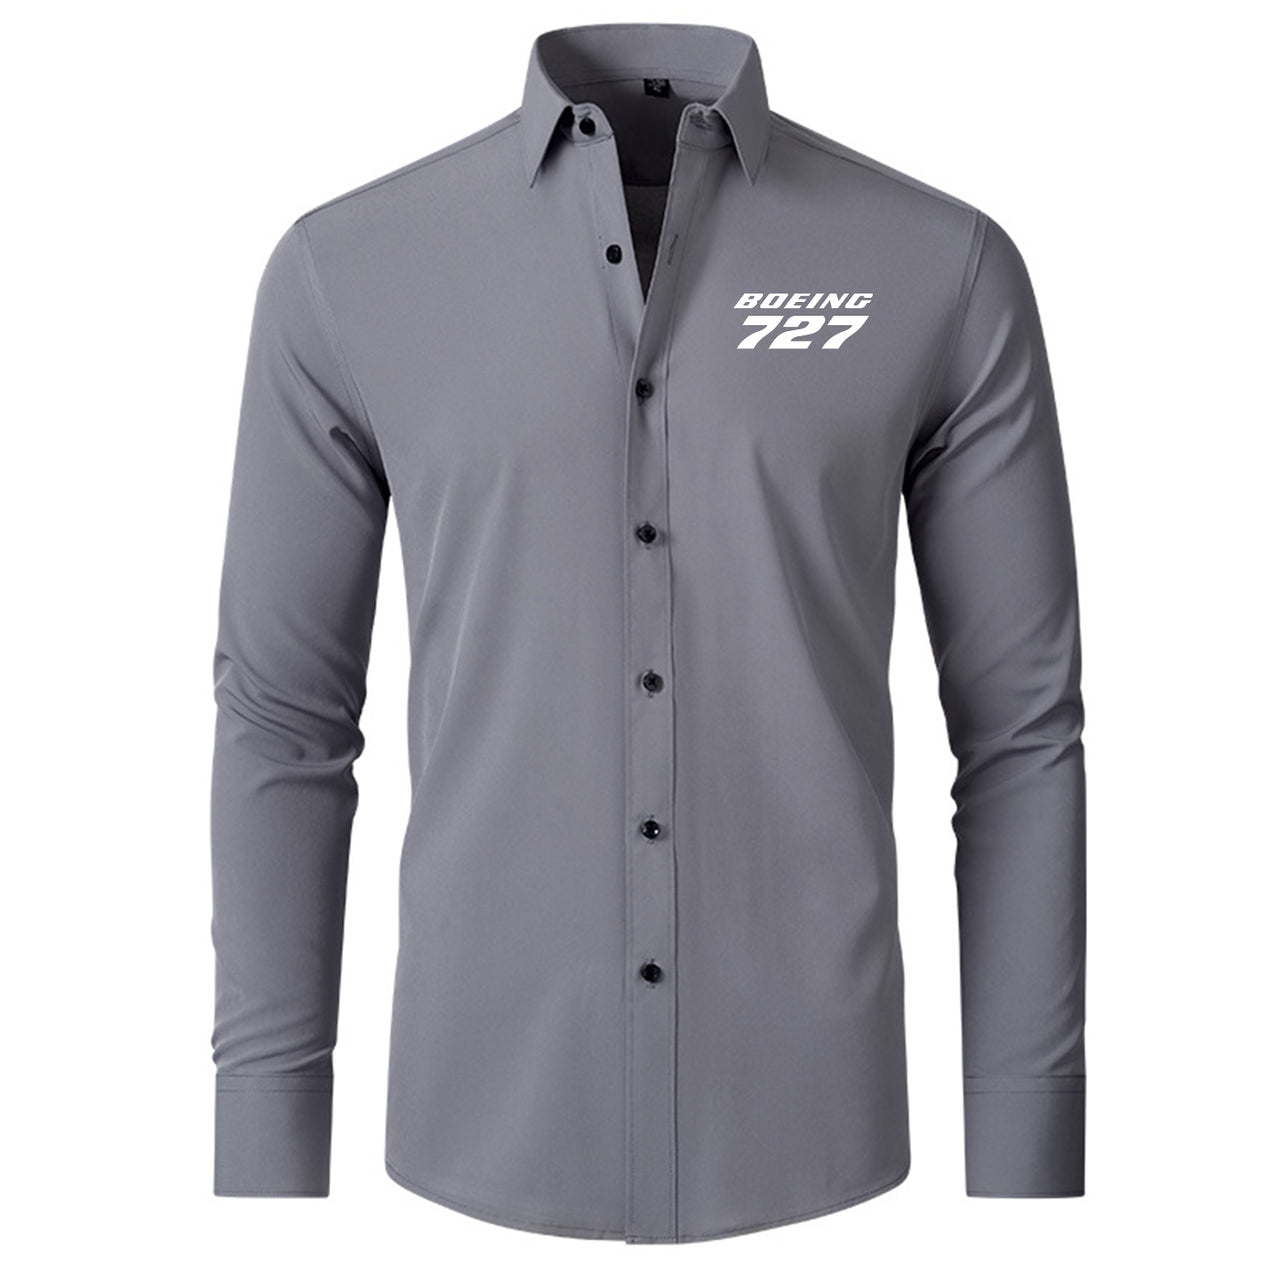 Boeing 727 & Text Designed Long Sleeve Shirts